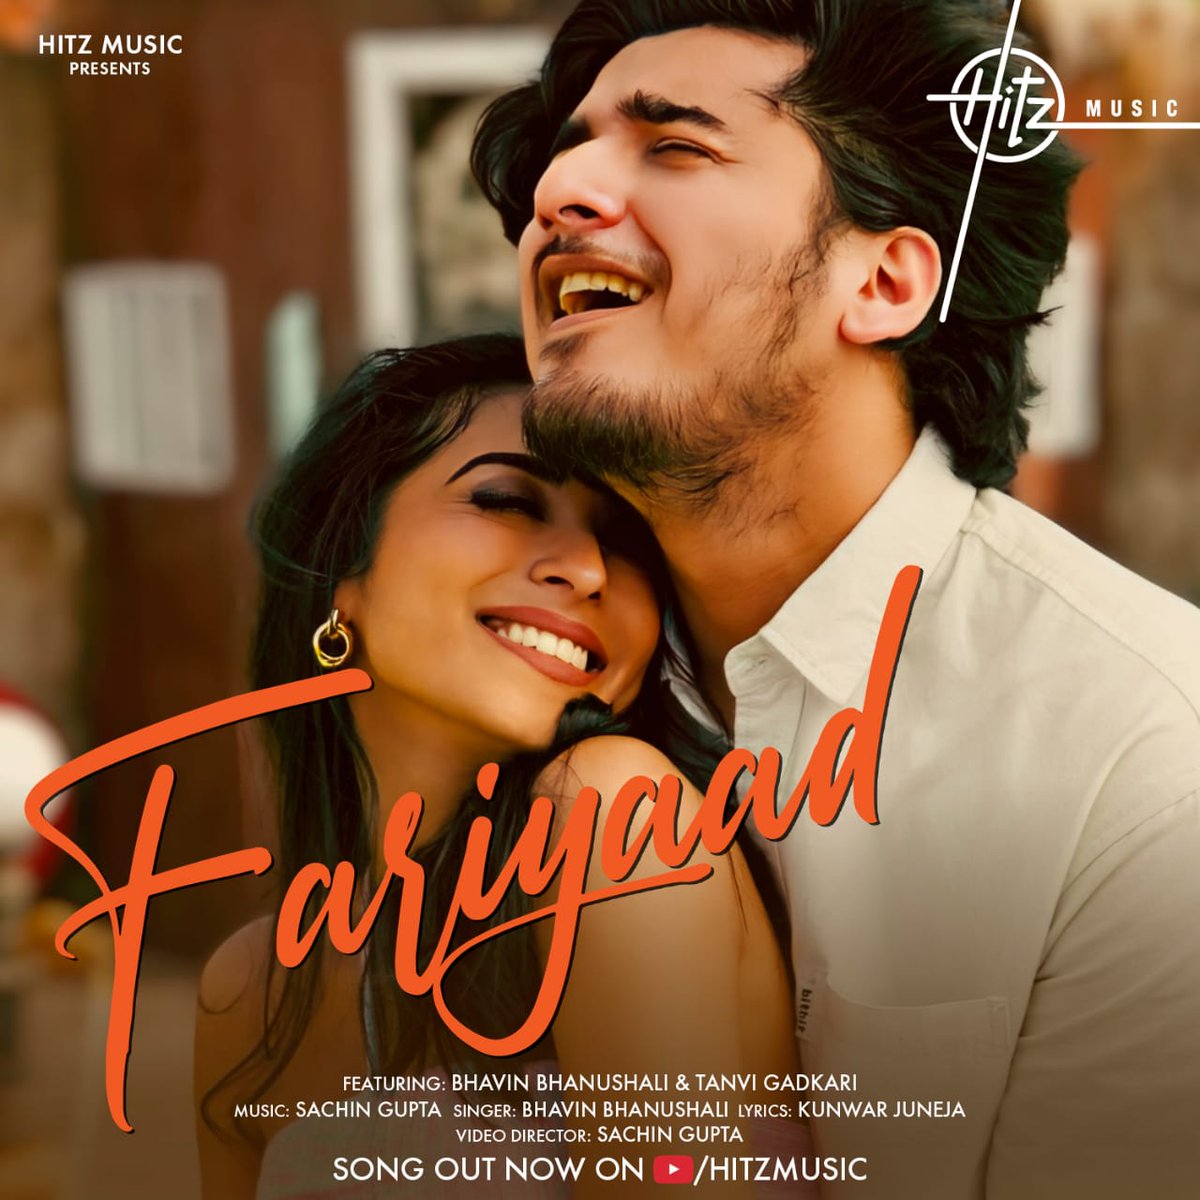 Experience the tale of heart break as Bhavin Bhanushali and Tanvi Gadkari come up with their new track #Fariyaad produced by #hitzmusic
Song out now.

 @HitzMusicoff
#BhavinBhanushali #TanviGadkari @sachingupta1208 #KunwarJuneja